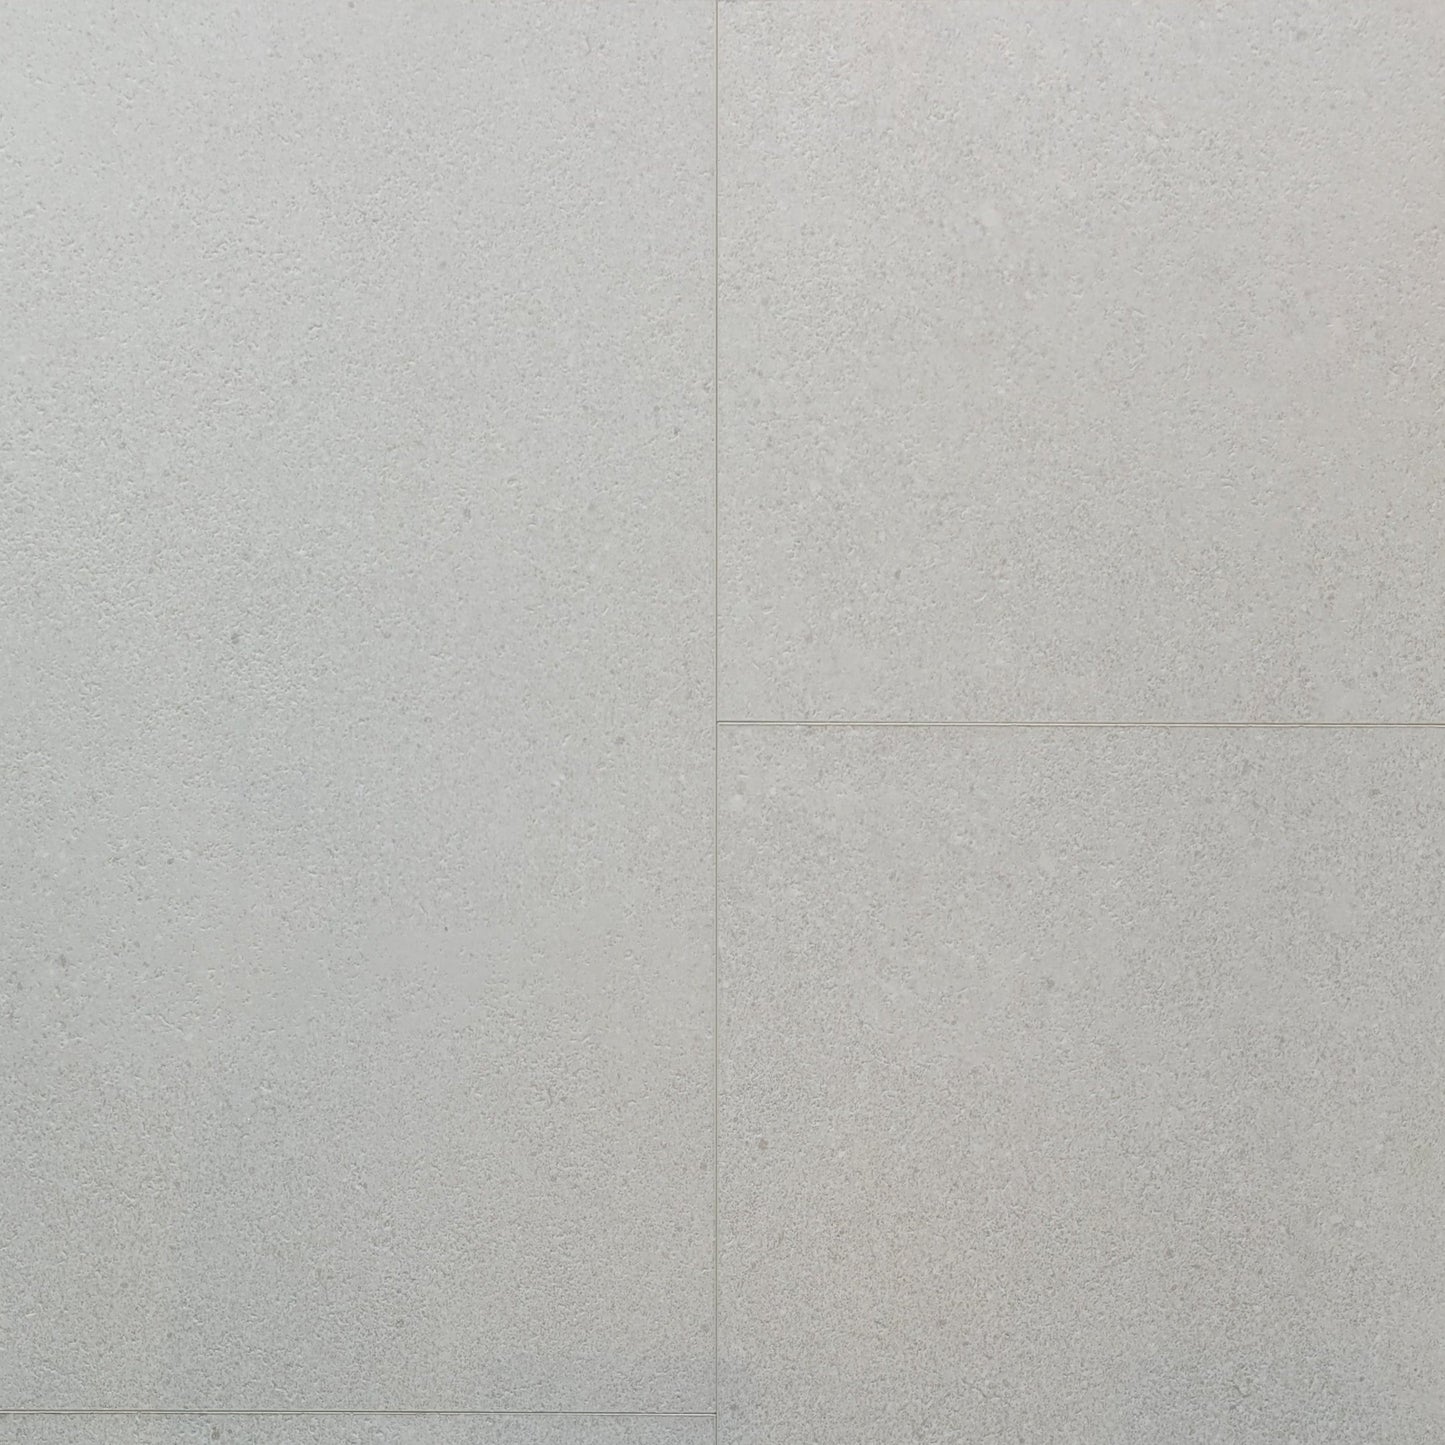 Rosseti Luxury Vinyl Tile (pad attached) $4.99/sf 32.3 sf/box